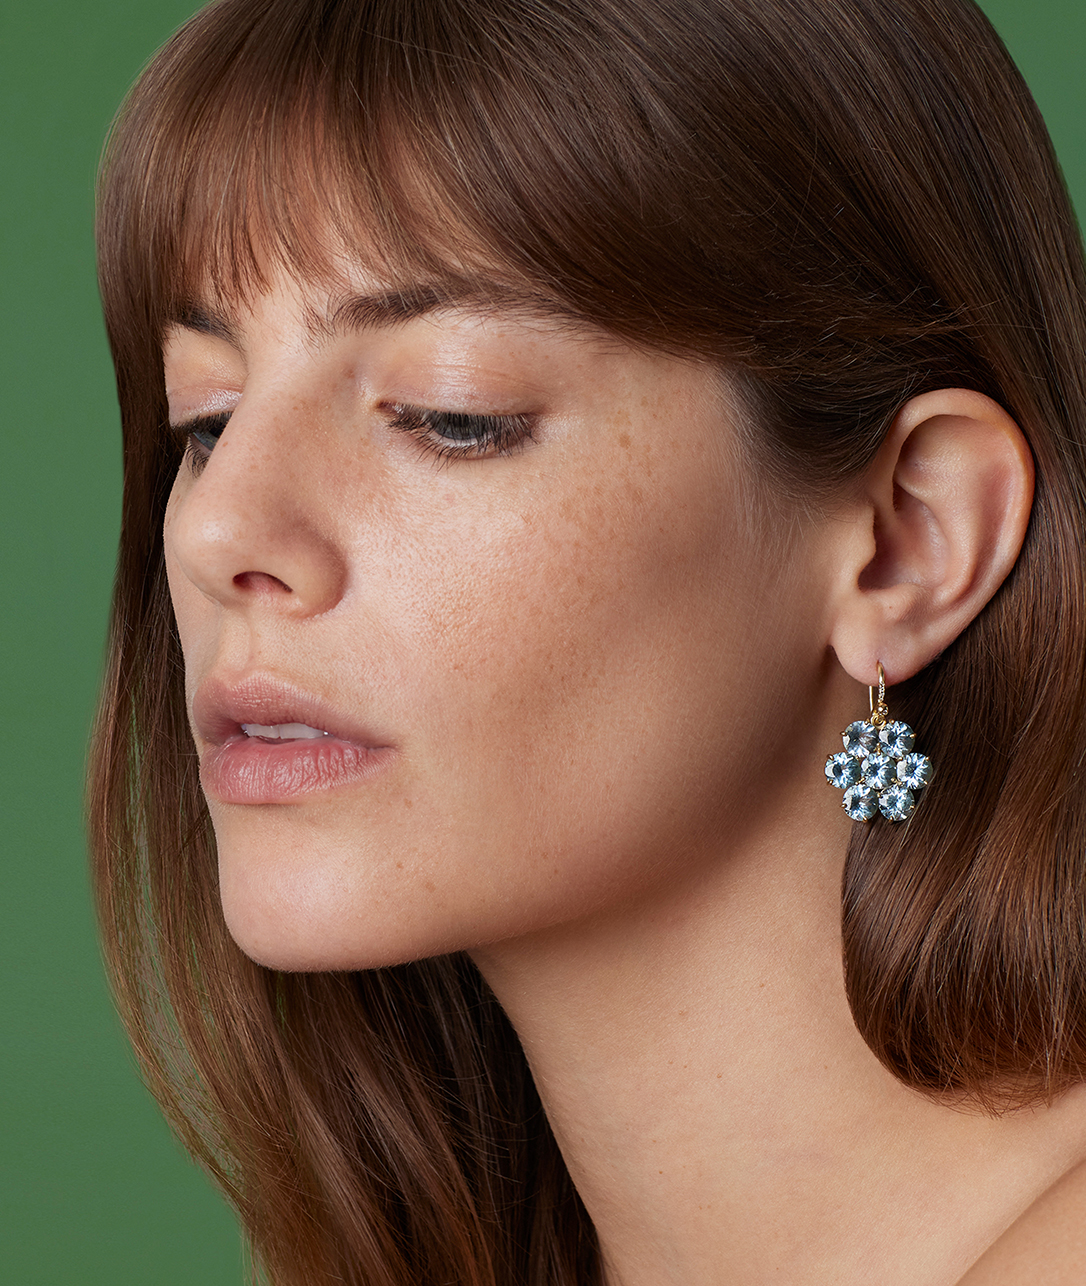 Gems? Flowers? Uniquely special? Floret Earrings check all the good-gift boxes.SHOP CLASSIC FLORET EARRINGS